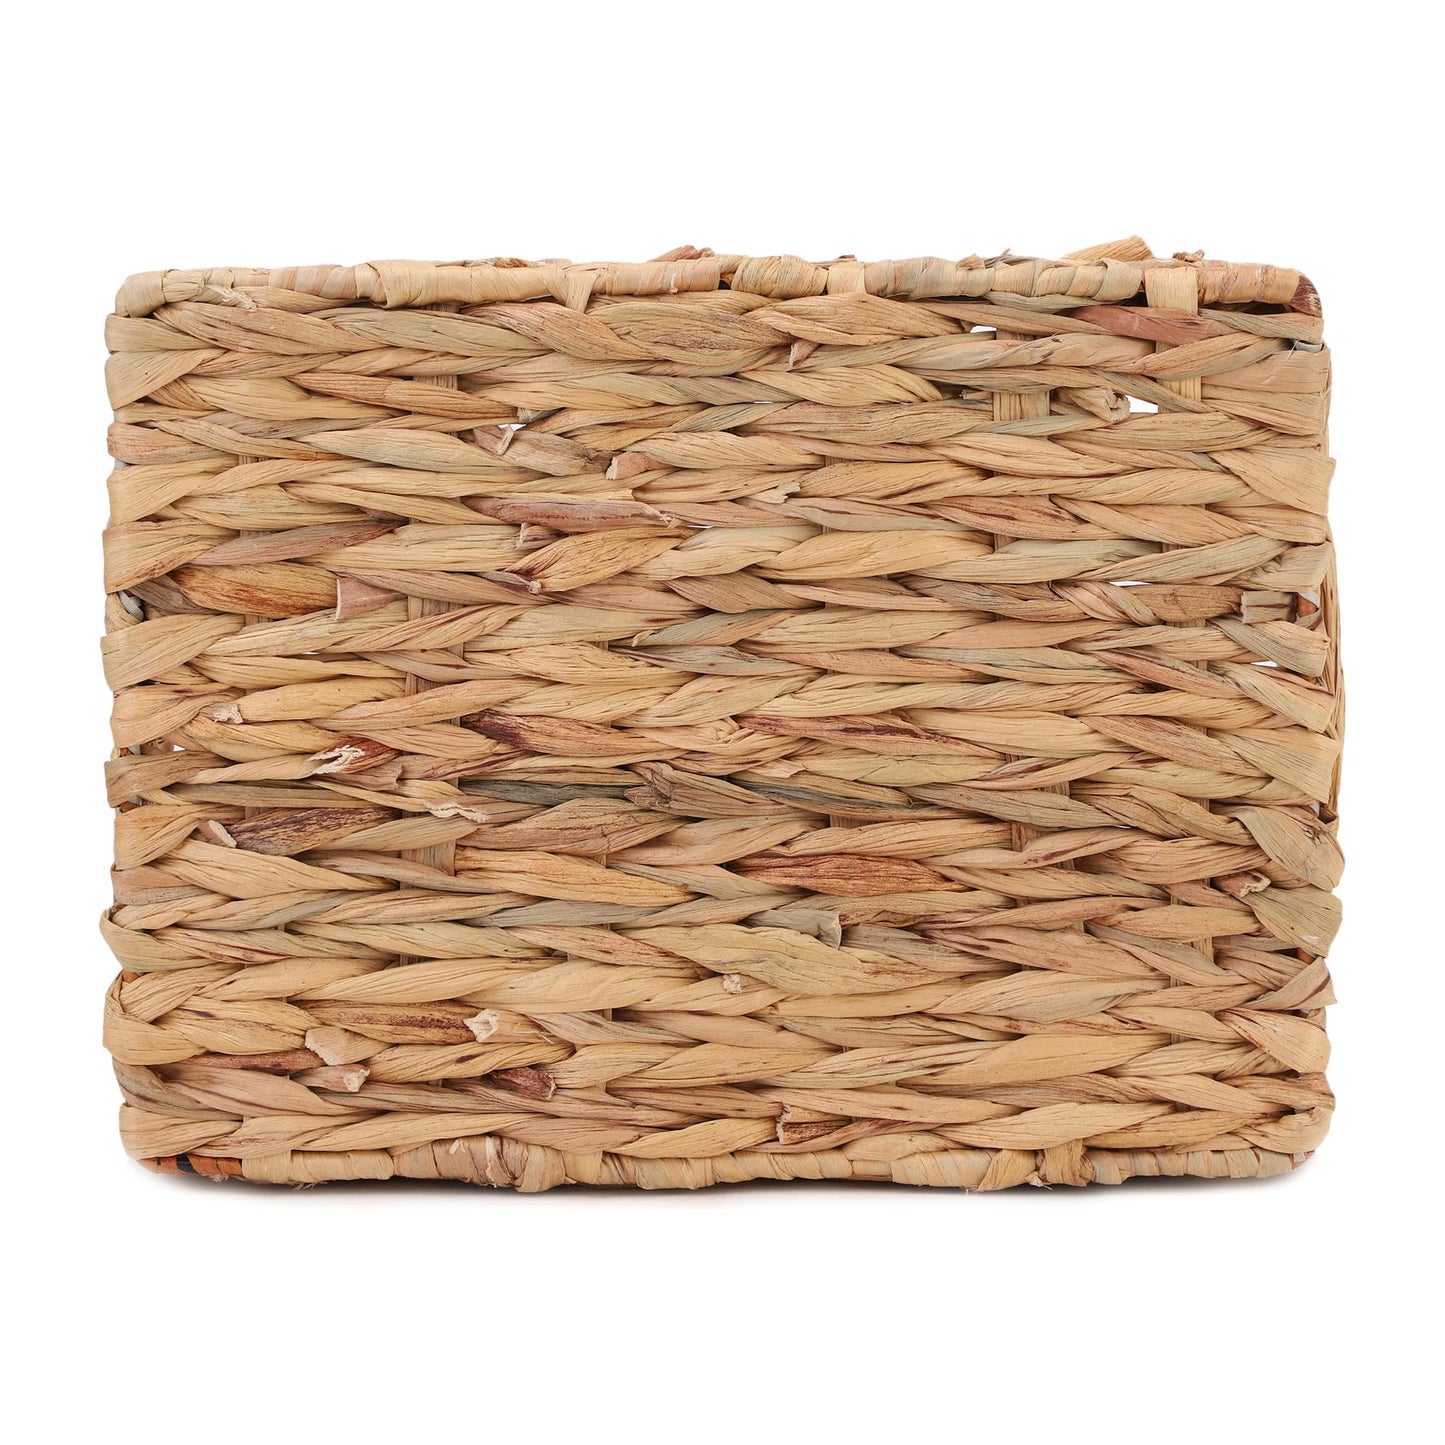 AKWAY Wicker Seagrass Water Hyacinth Kauna Grass Serving Tray Serving Tray for Home | Dining Table Decorative Trays | Serving Tray | Platter with Handles Diwali or Deepawali Gifts | 11" x 8" x 2.5"- Akway